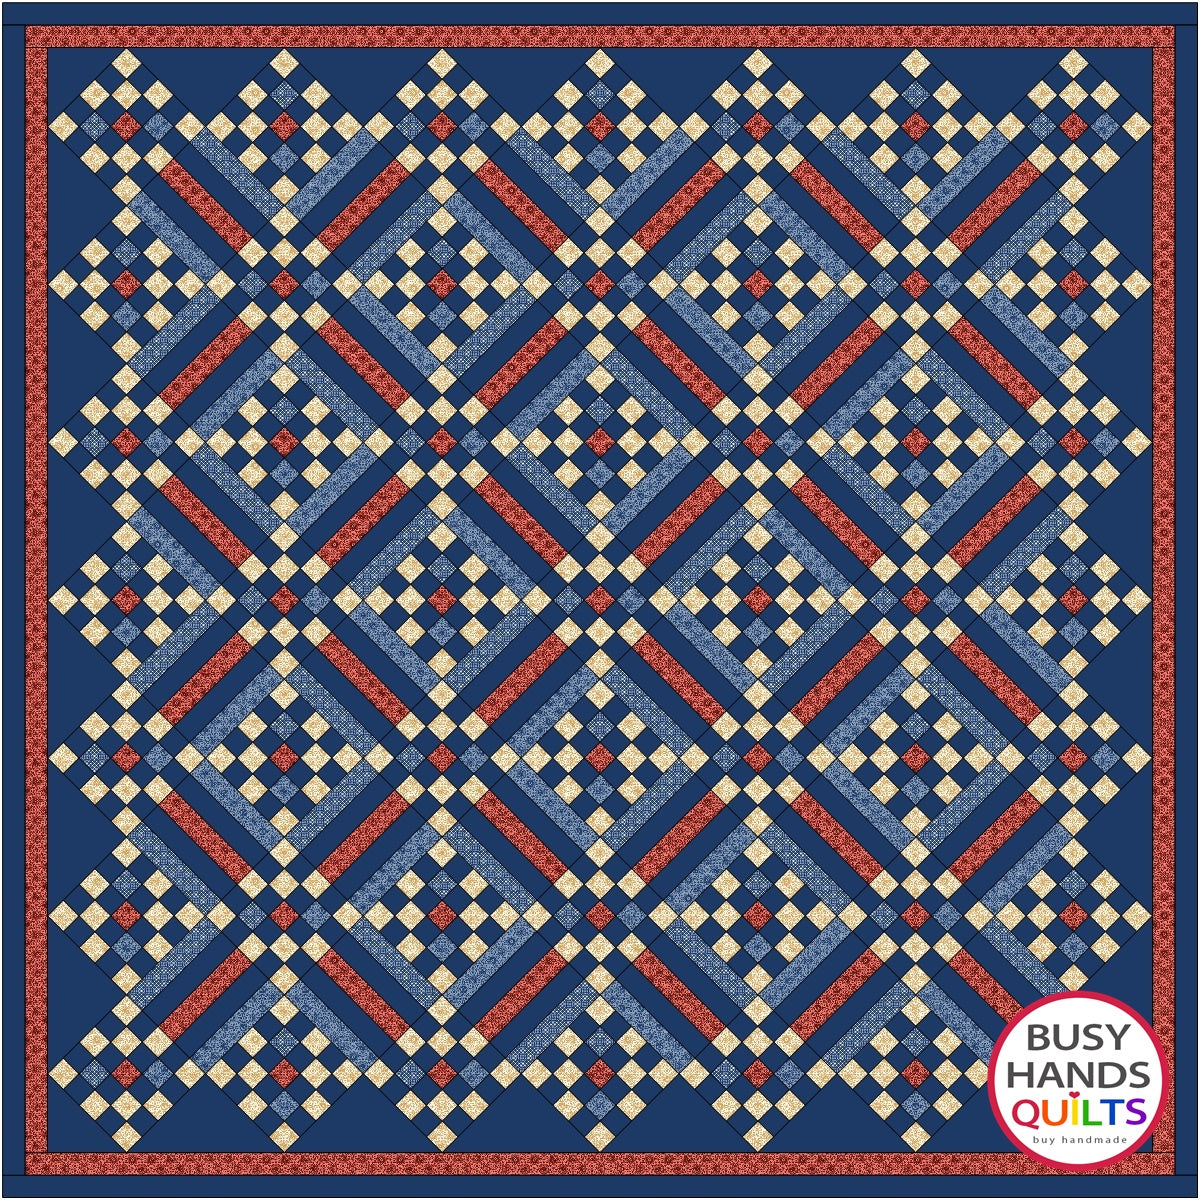 Sweet Caroline II Quilt Pattern PDF DOWNLOAD Busy Hands Quilts $12.99